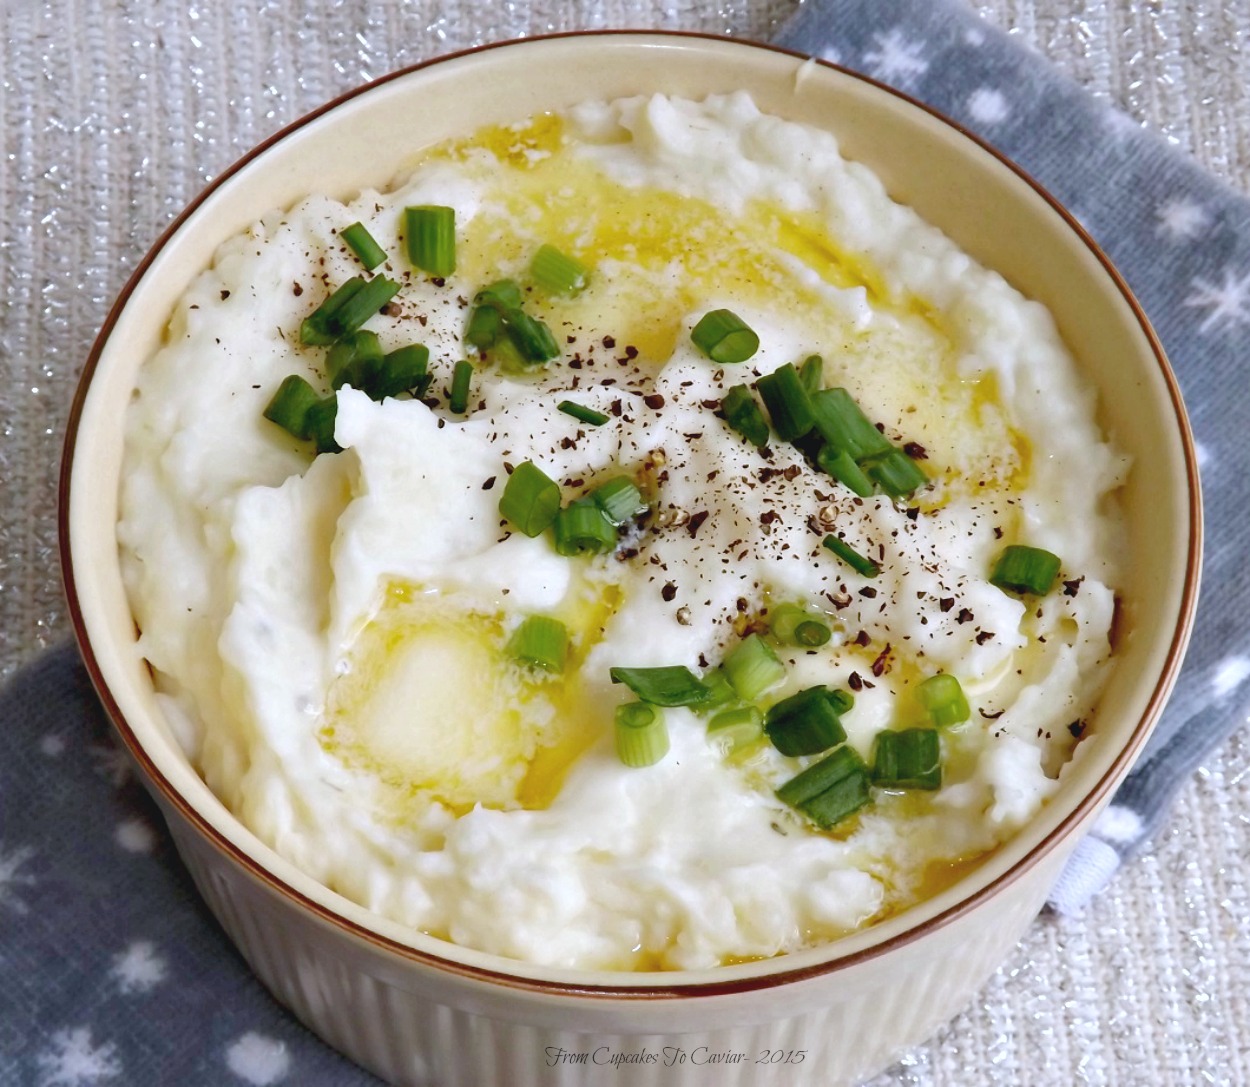 Ultimate Buttery Sour Cream And Onion Mashed Potatoes